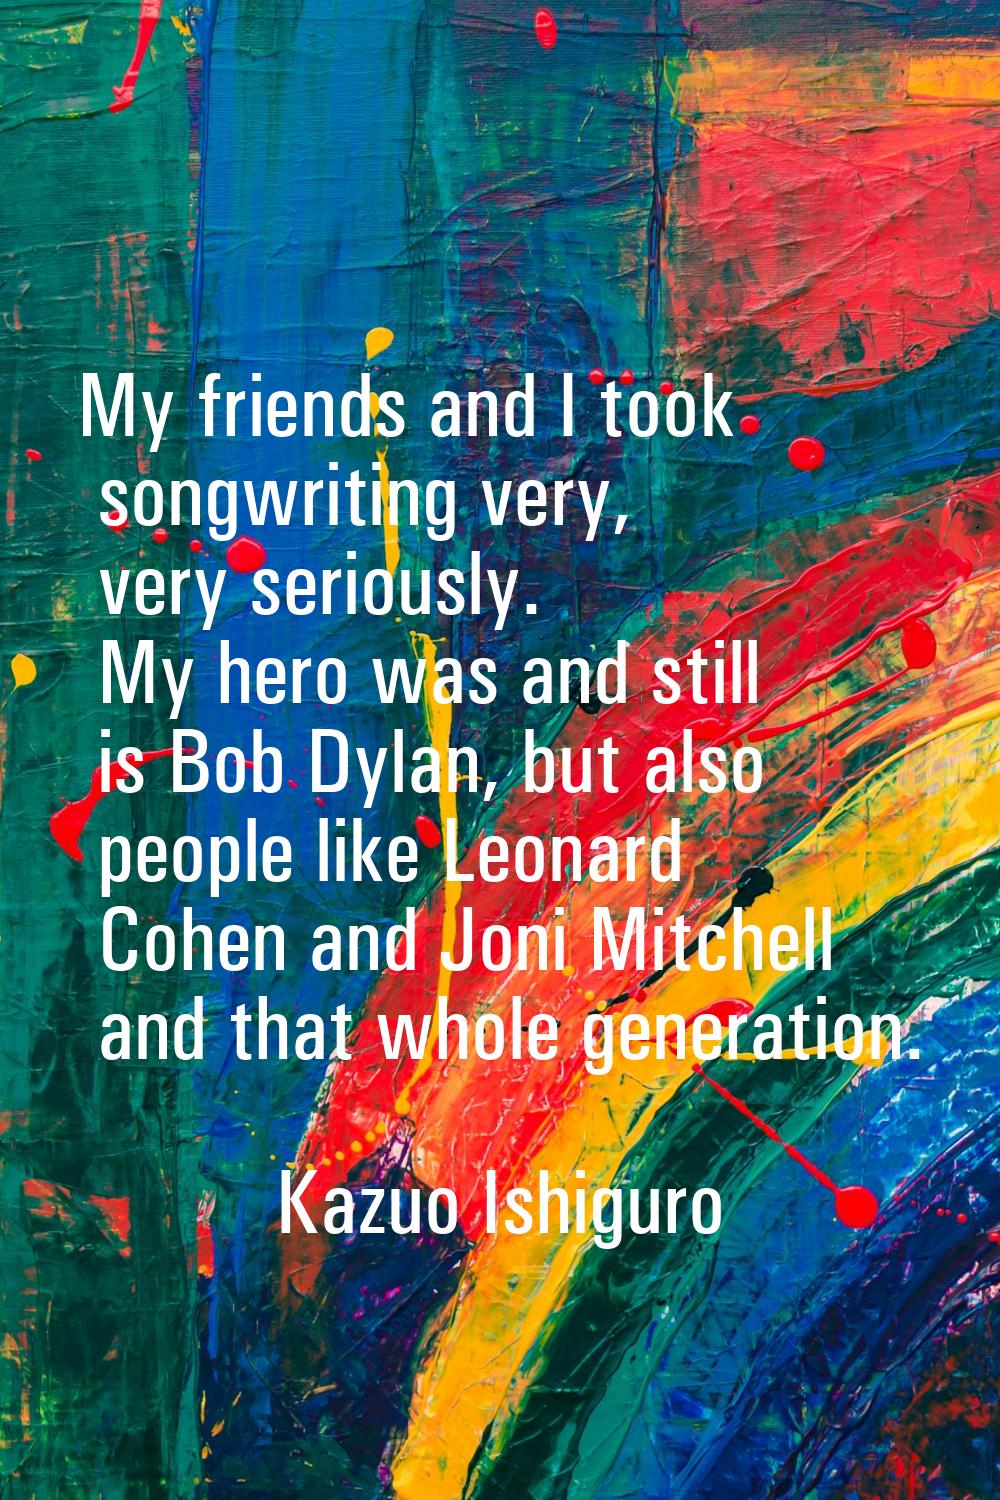 My friends and I took songwriting very, very seriously. My hero was and still is Bob Dylan, but als